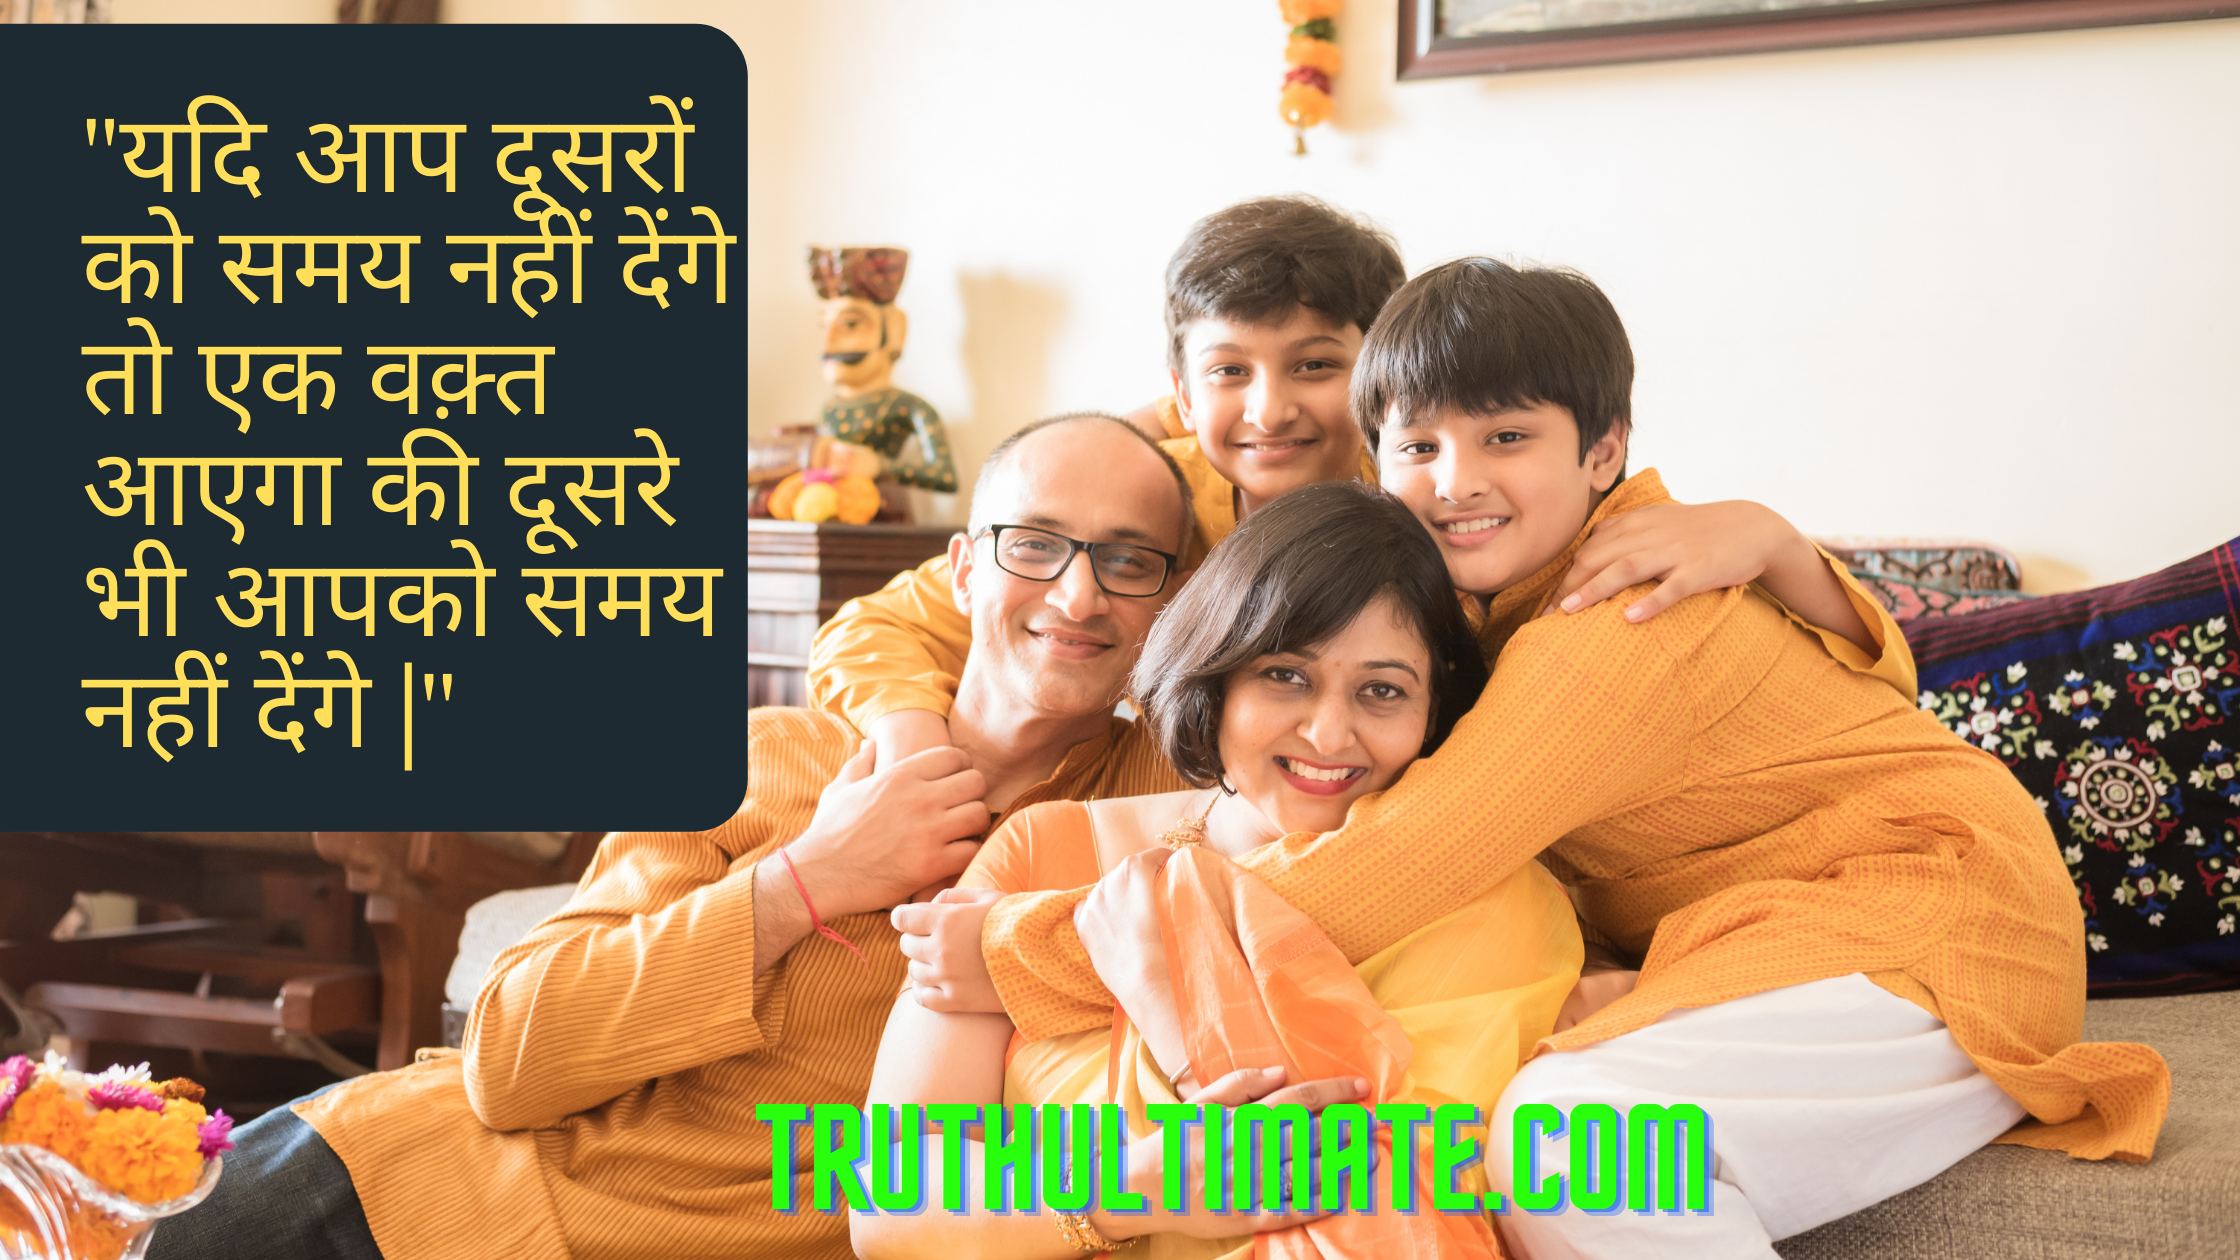 50 motivational quotes in Hindi